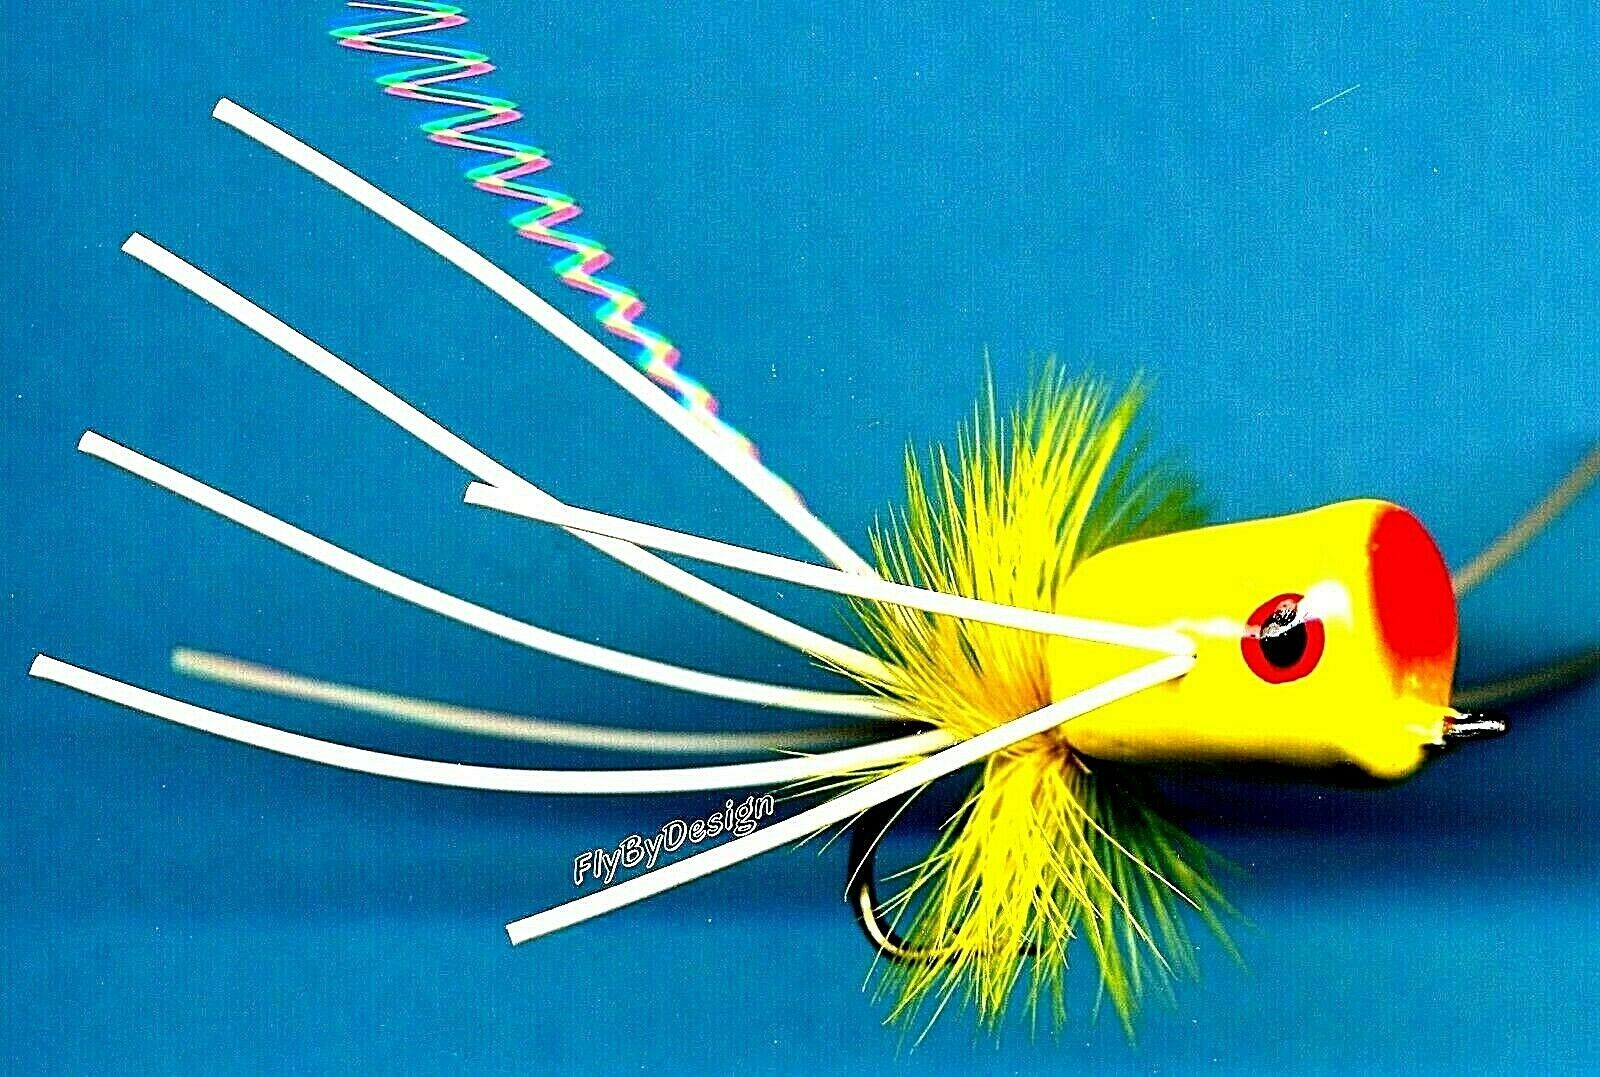 Yellow Bass / Bream Popper Fly Fishing Flies - Your Choice Of Hook Size & Qty